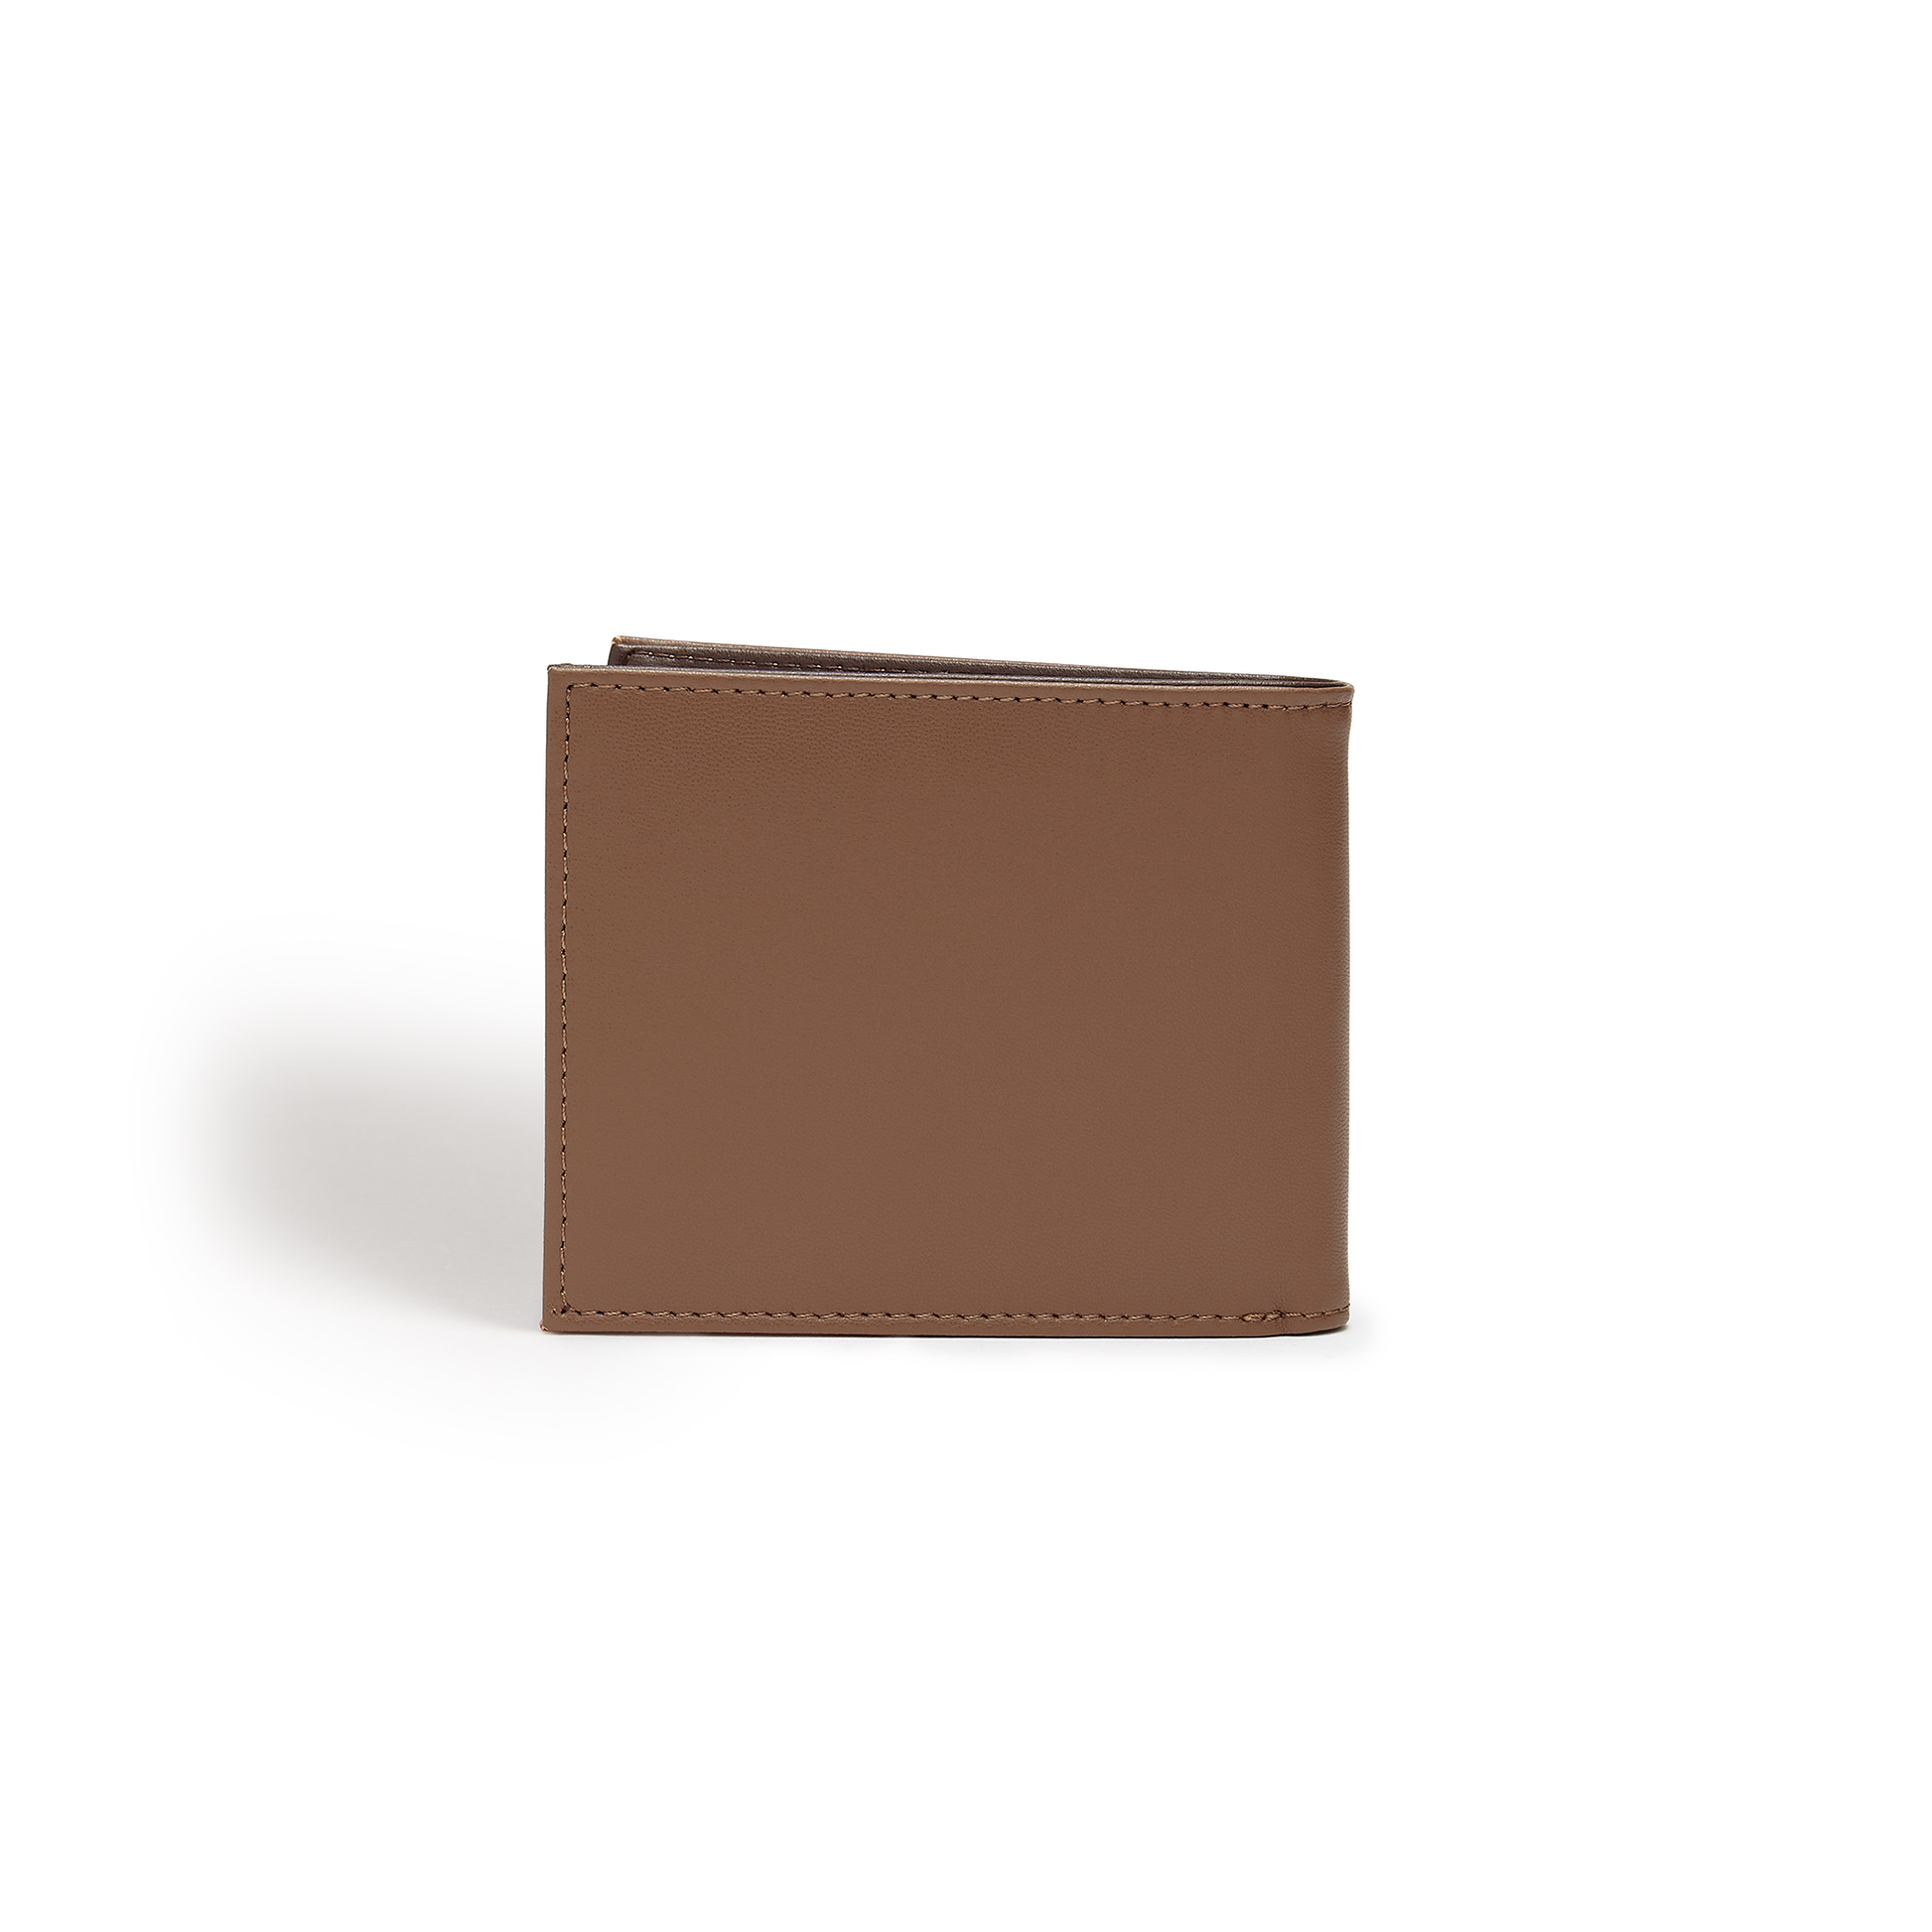 A closed Brown - Brave Vegan Bifold Wallet from Jade Azolla is shown against a white background.